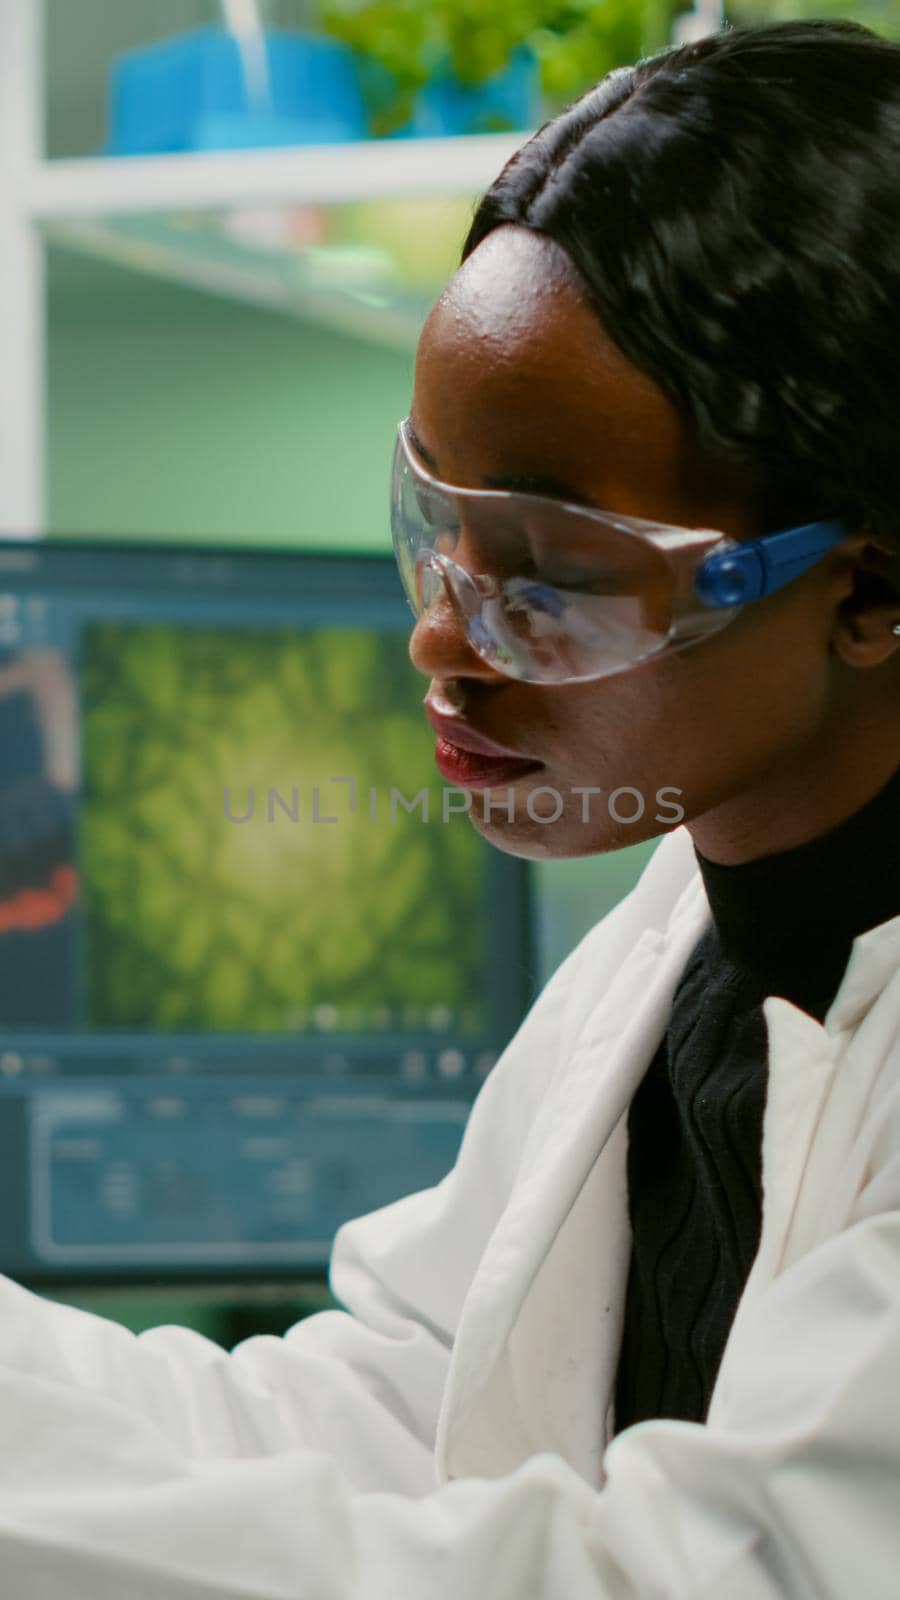 Biotechnology scientist examining botany green leaf using biological microscope researching medical expertise. Chemist analyzing organic agriculture plants in microbiology scientific laboratory